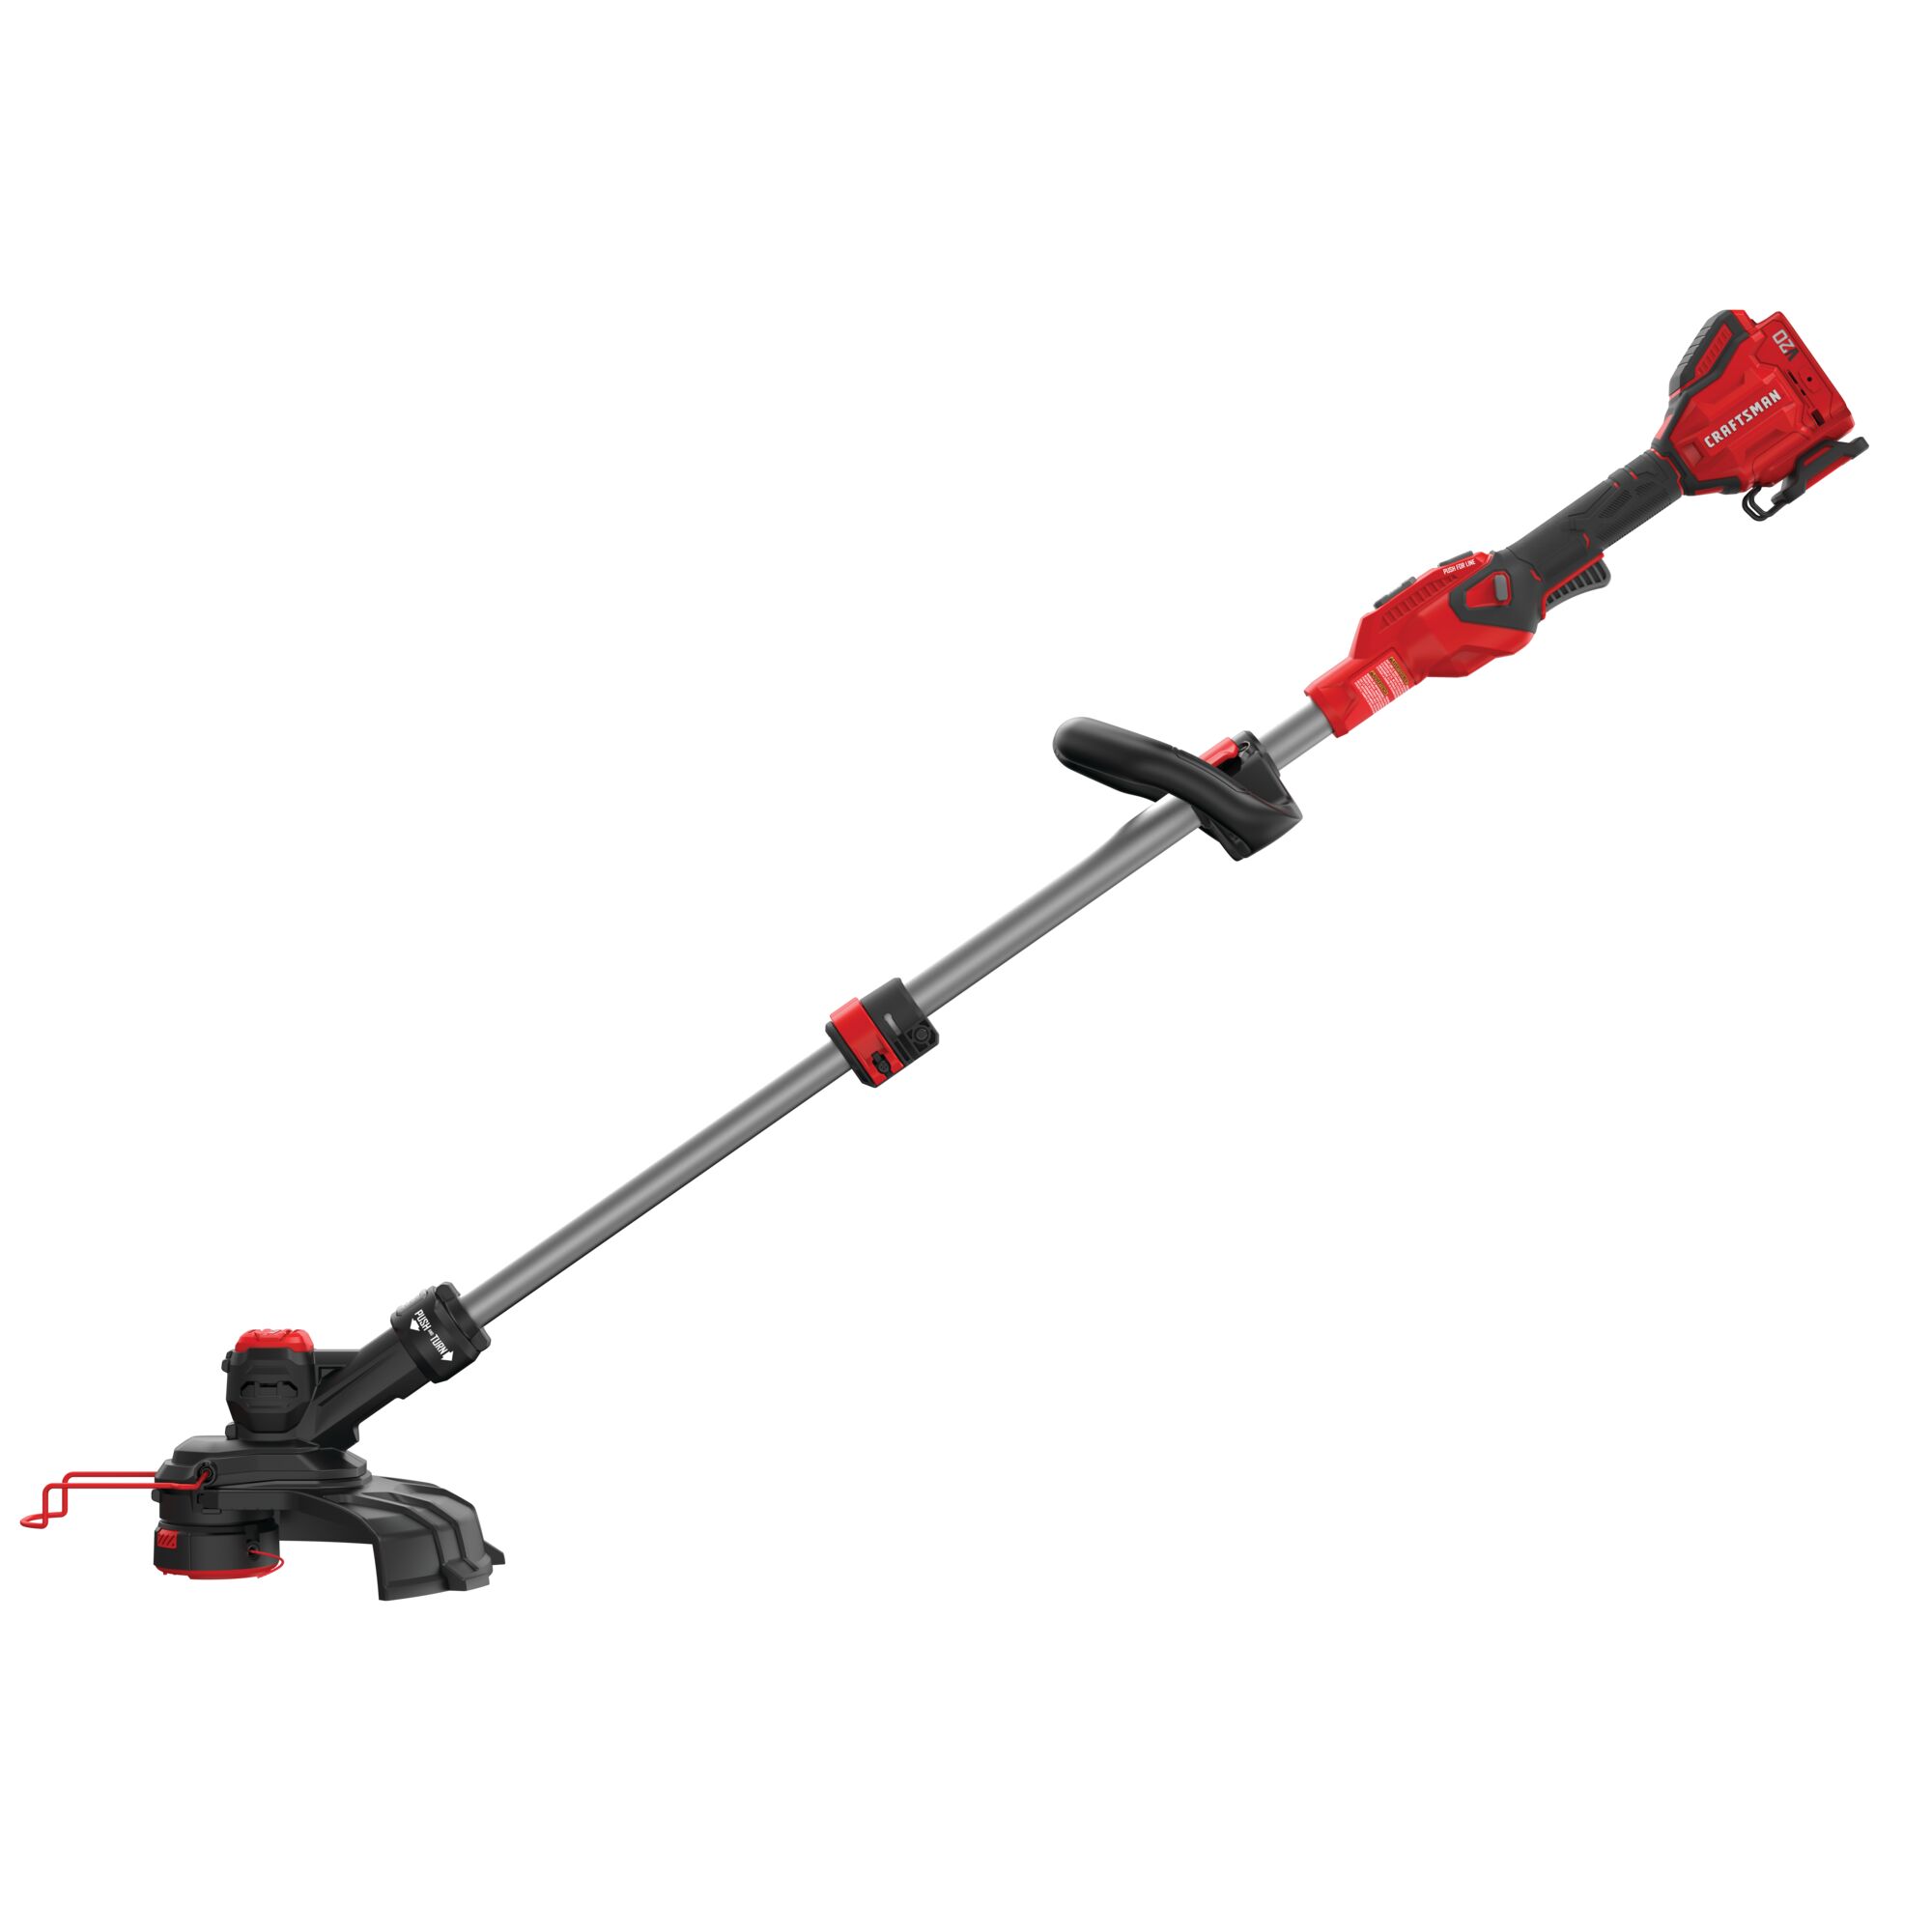 20 volt cordless 13 inch weedwacker string trimmer edger with push button feed.